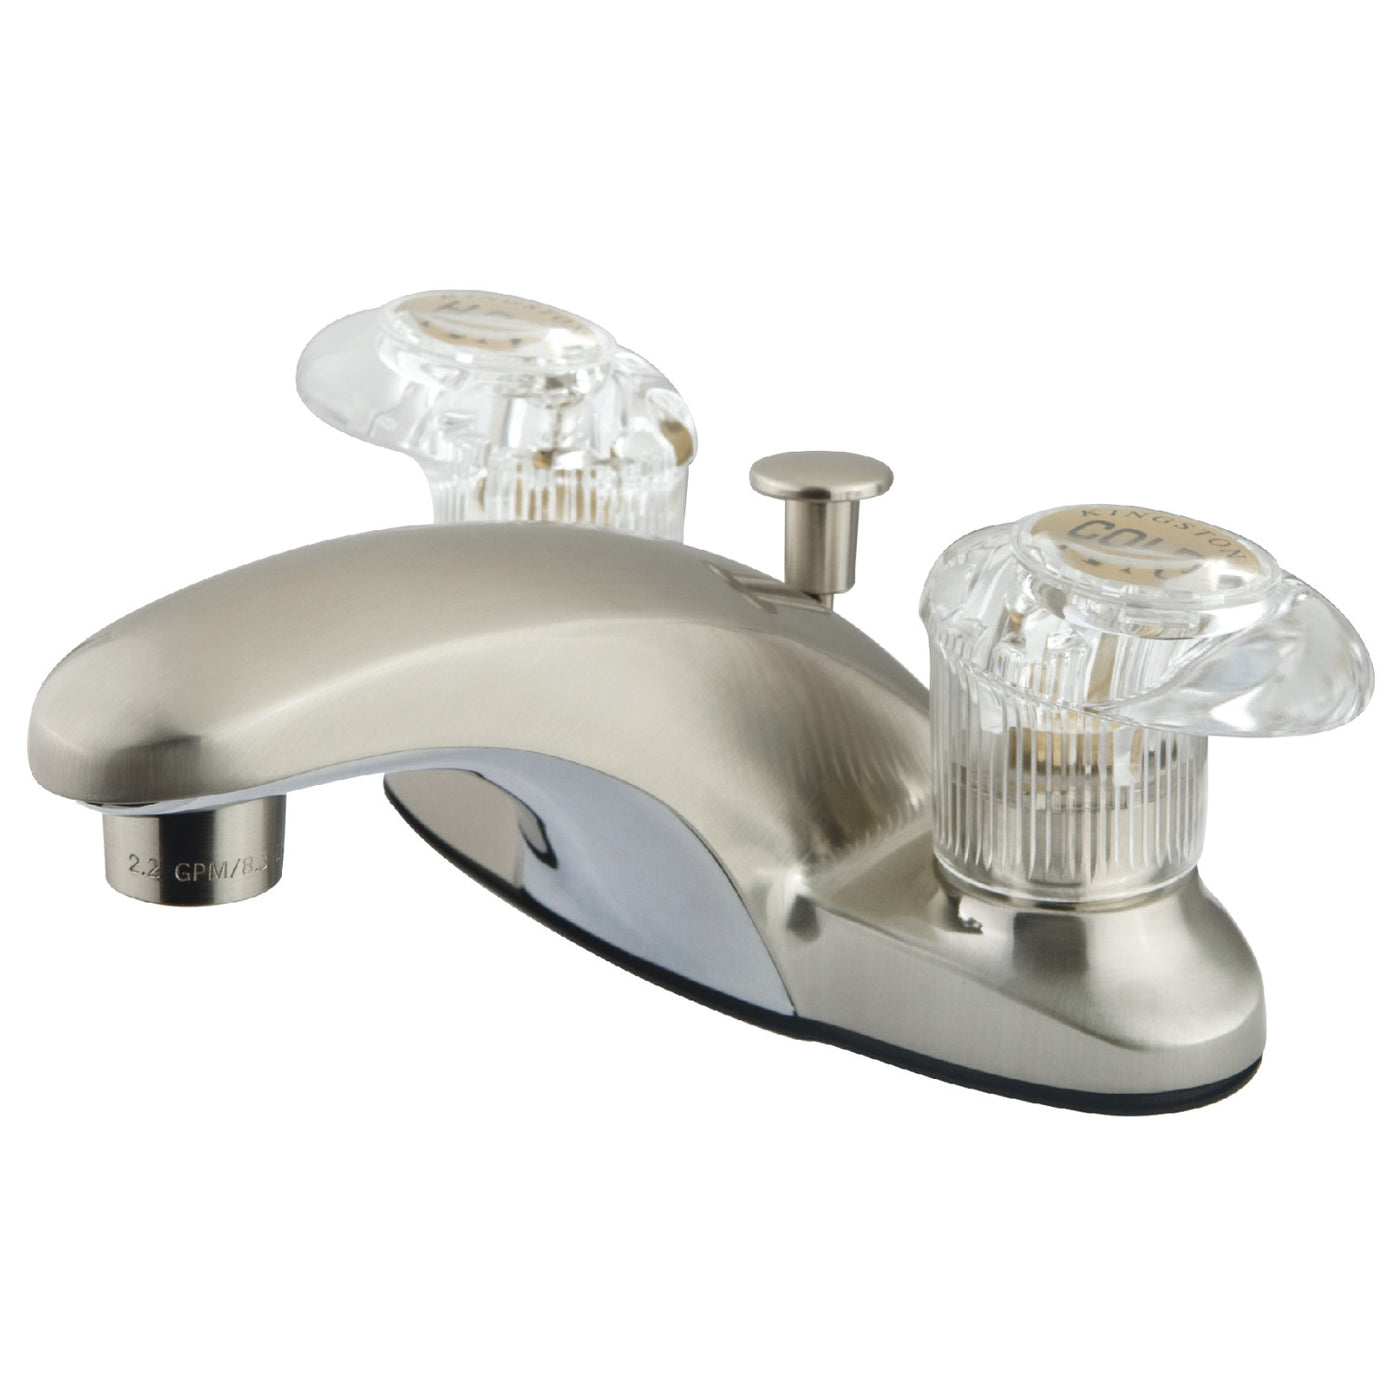 Elements of Design EB6158 4-Inch Centerset Bathroom Faucet, Brushed Nickel